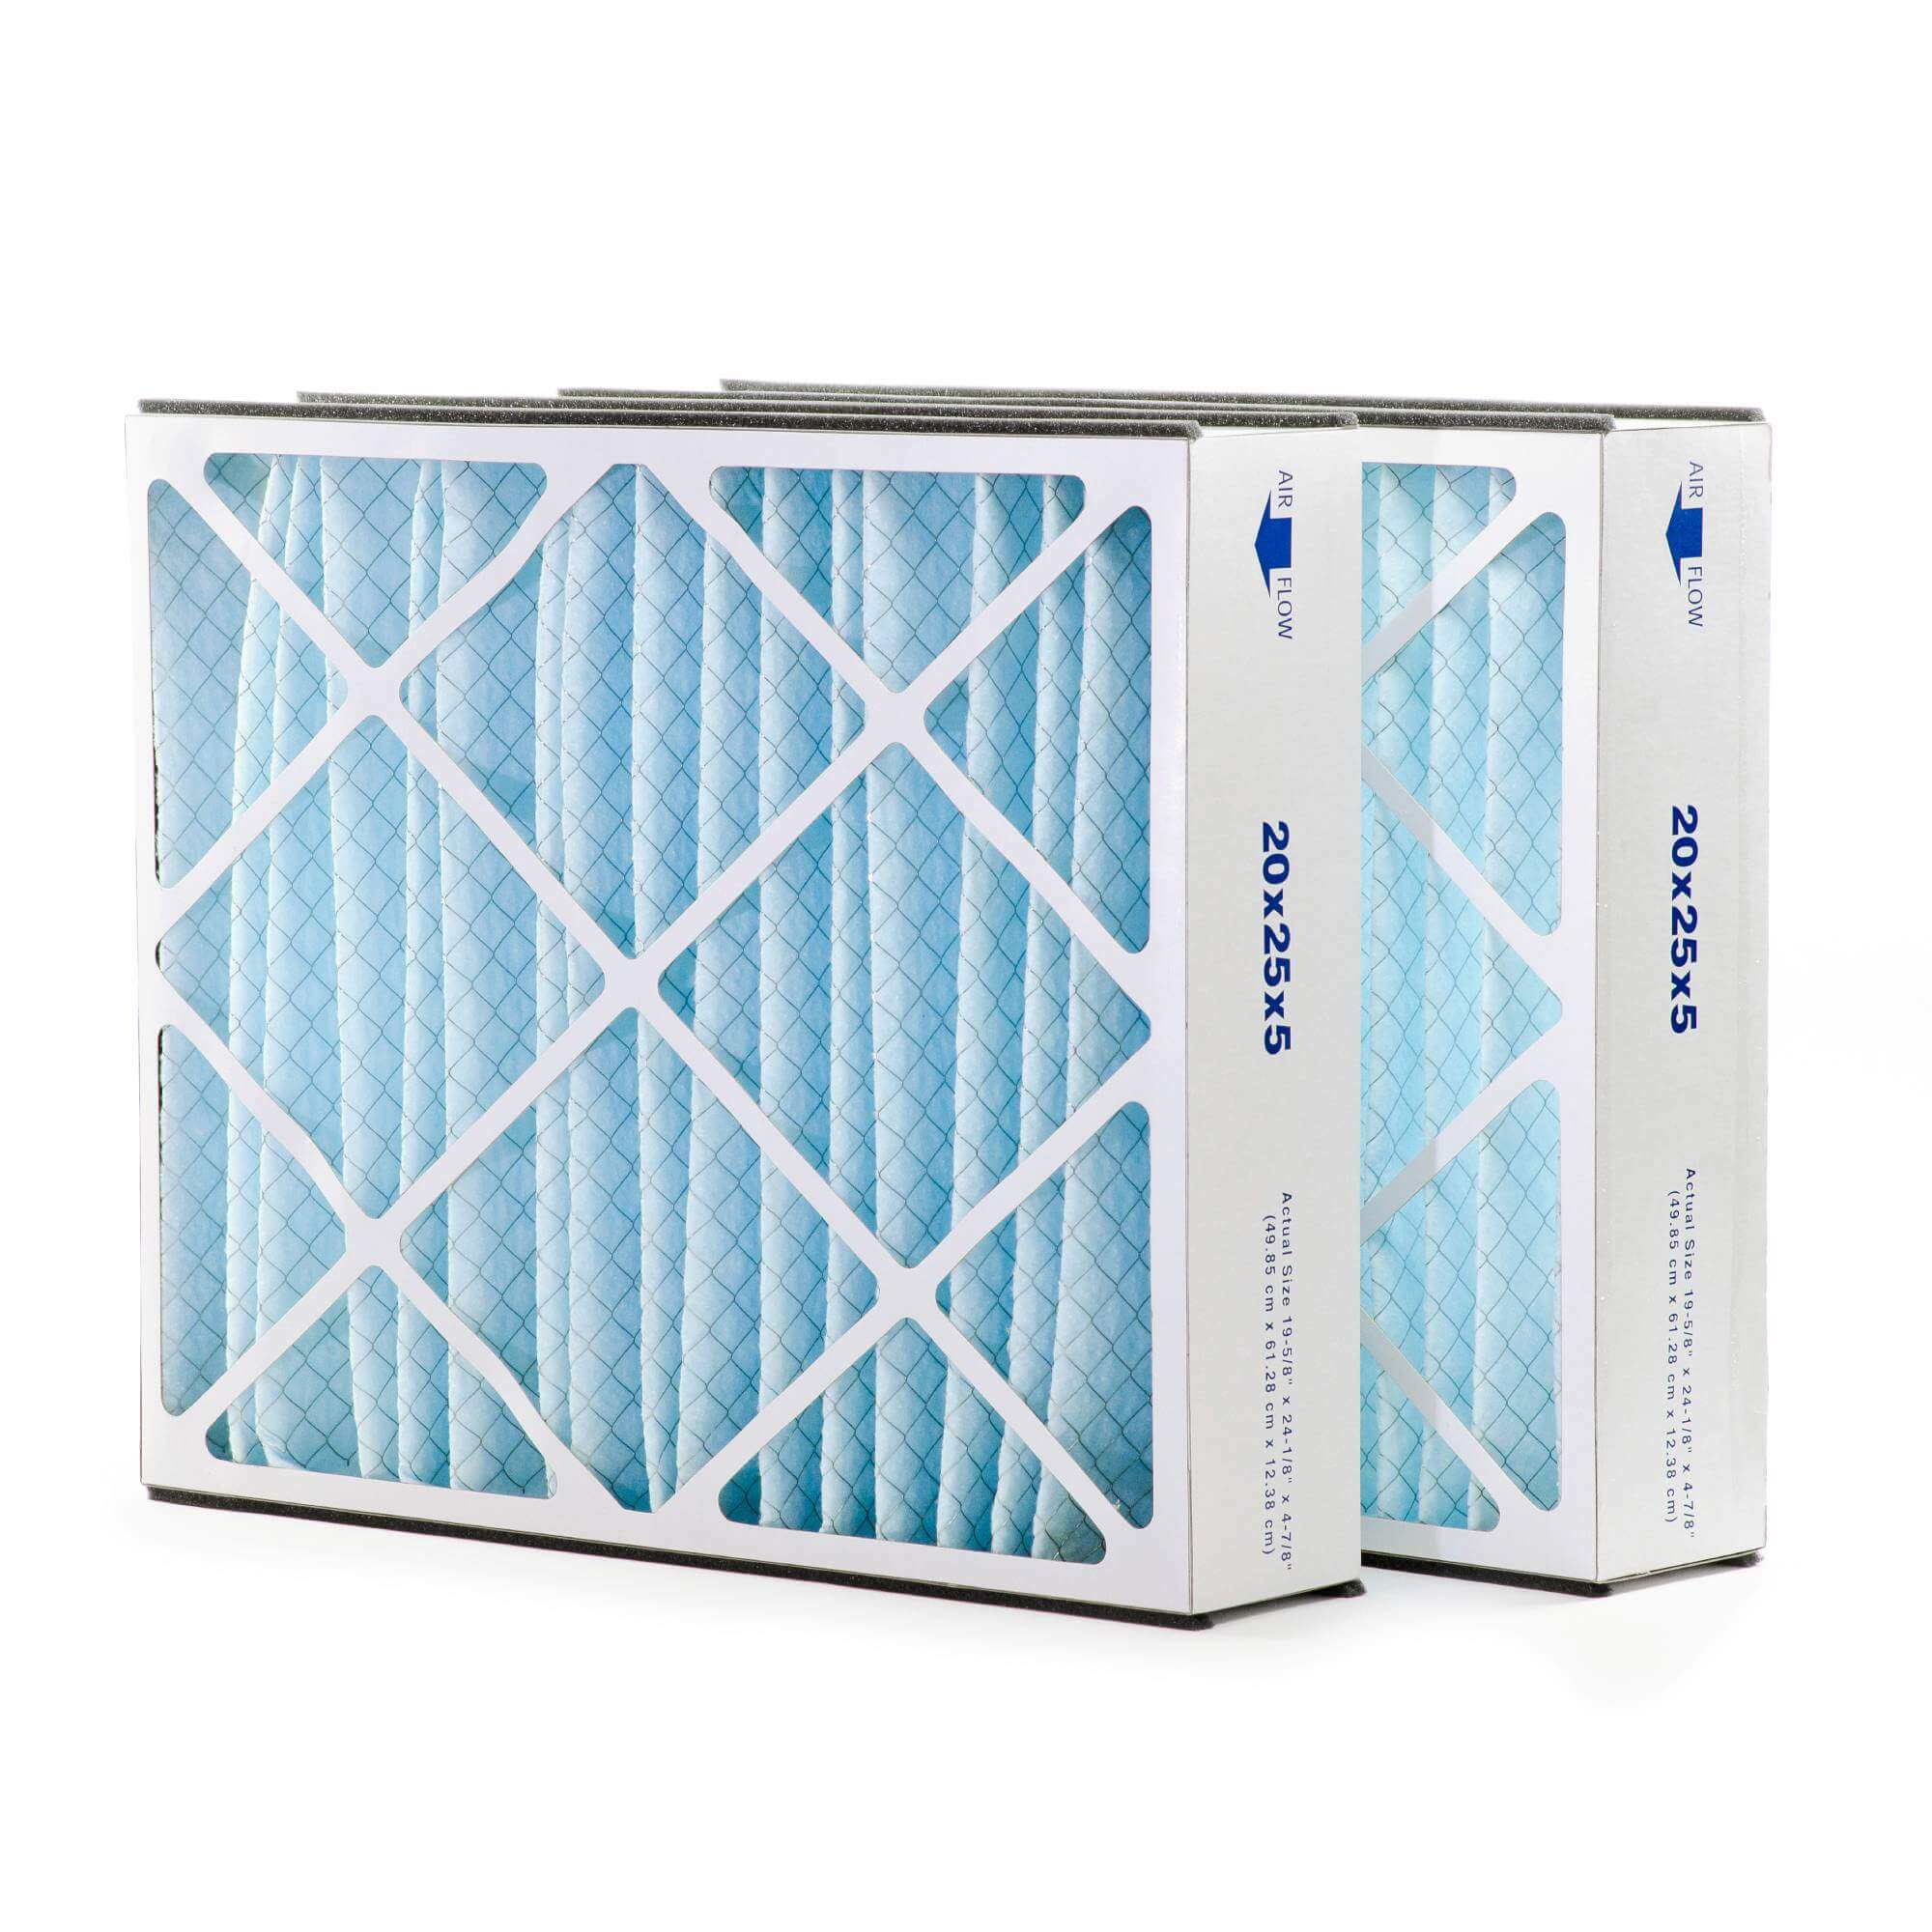 Filters Fast® Replacement for Trion Air Bear 259112-102 20x25x5 MERV 11 Furnace & AC Air Filter - 2-Pack thumbnail